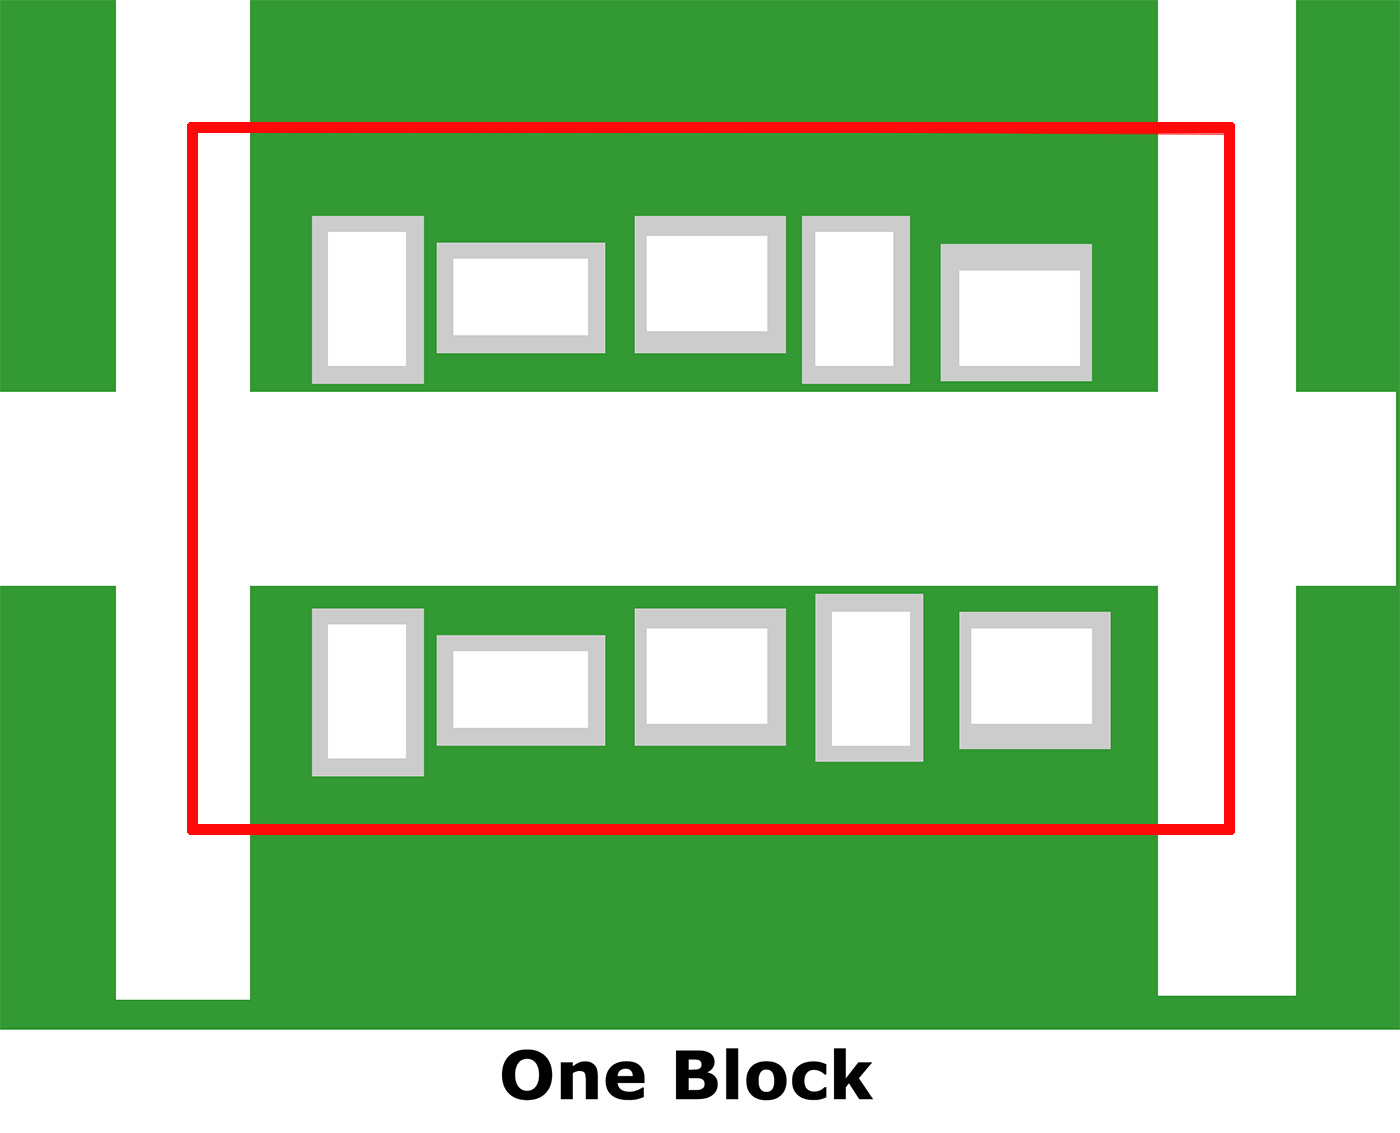 A graphic showing an example of what constitutes "one block" situated between two cross streets